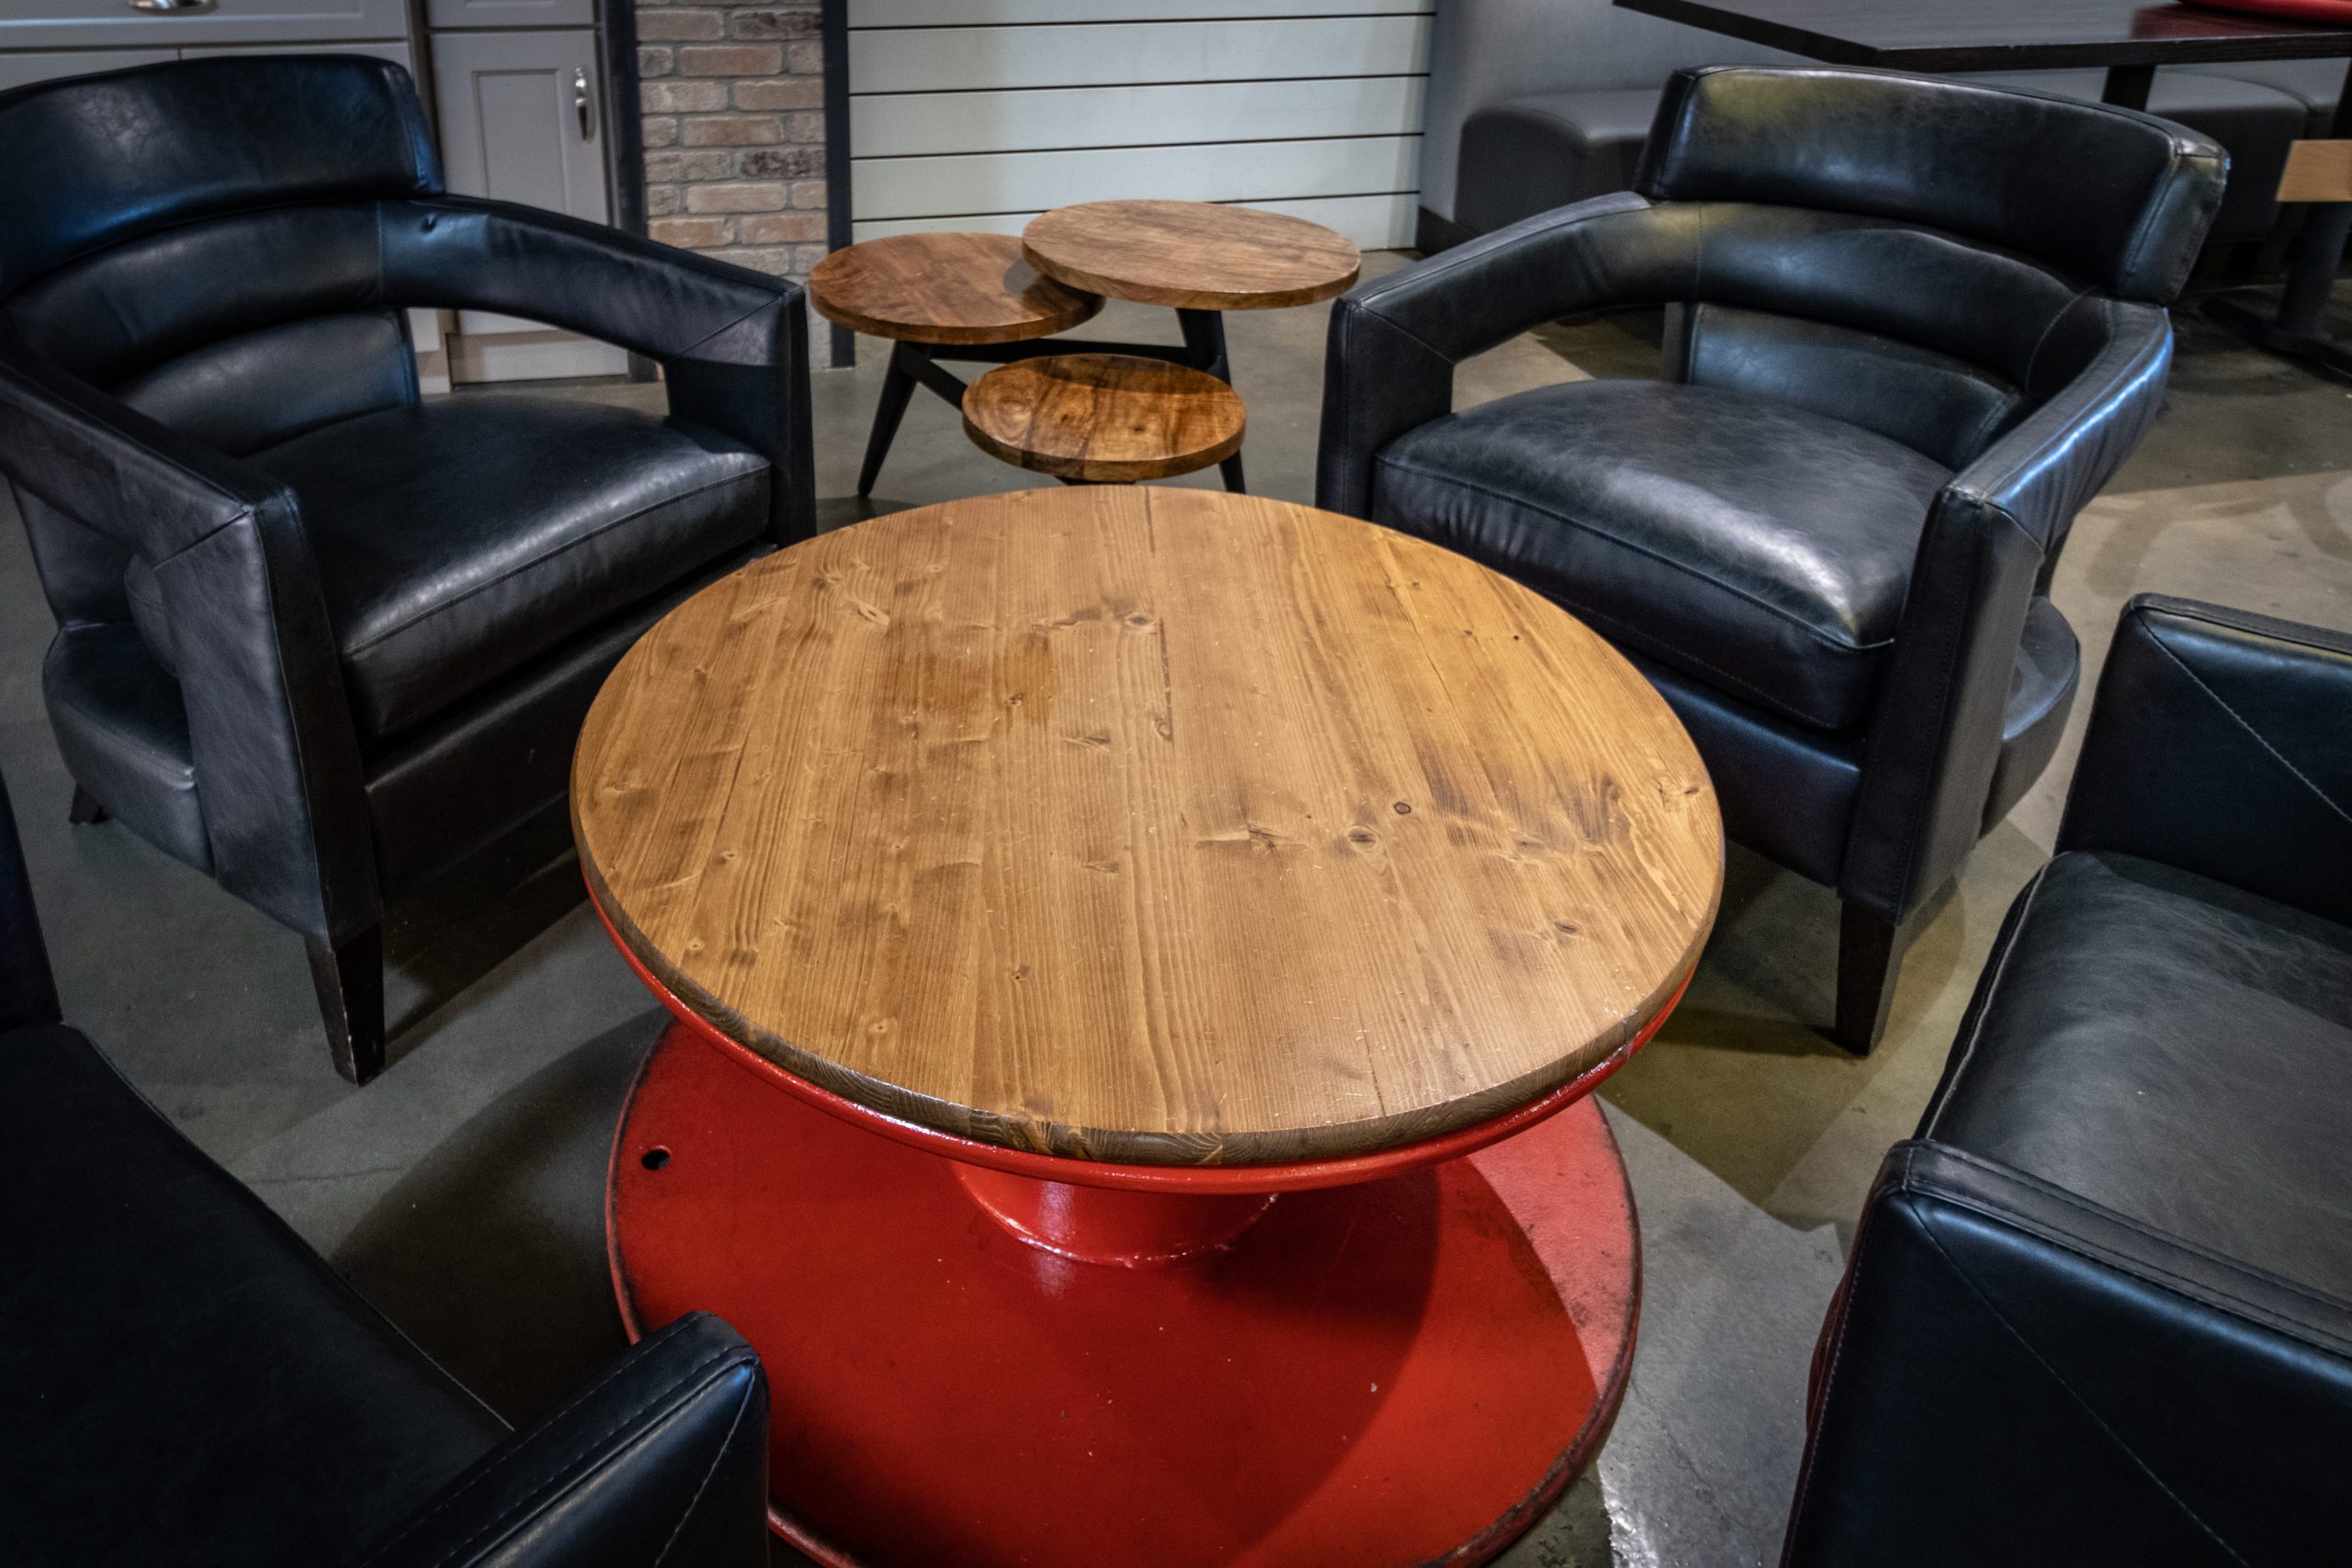 Black leather chairs with surrounding industrial style tables.